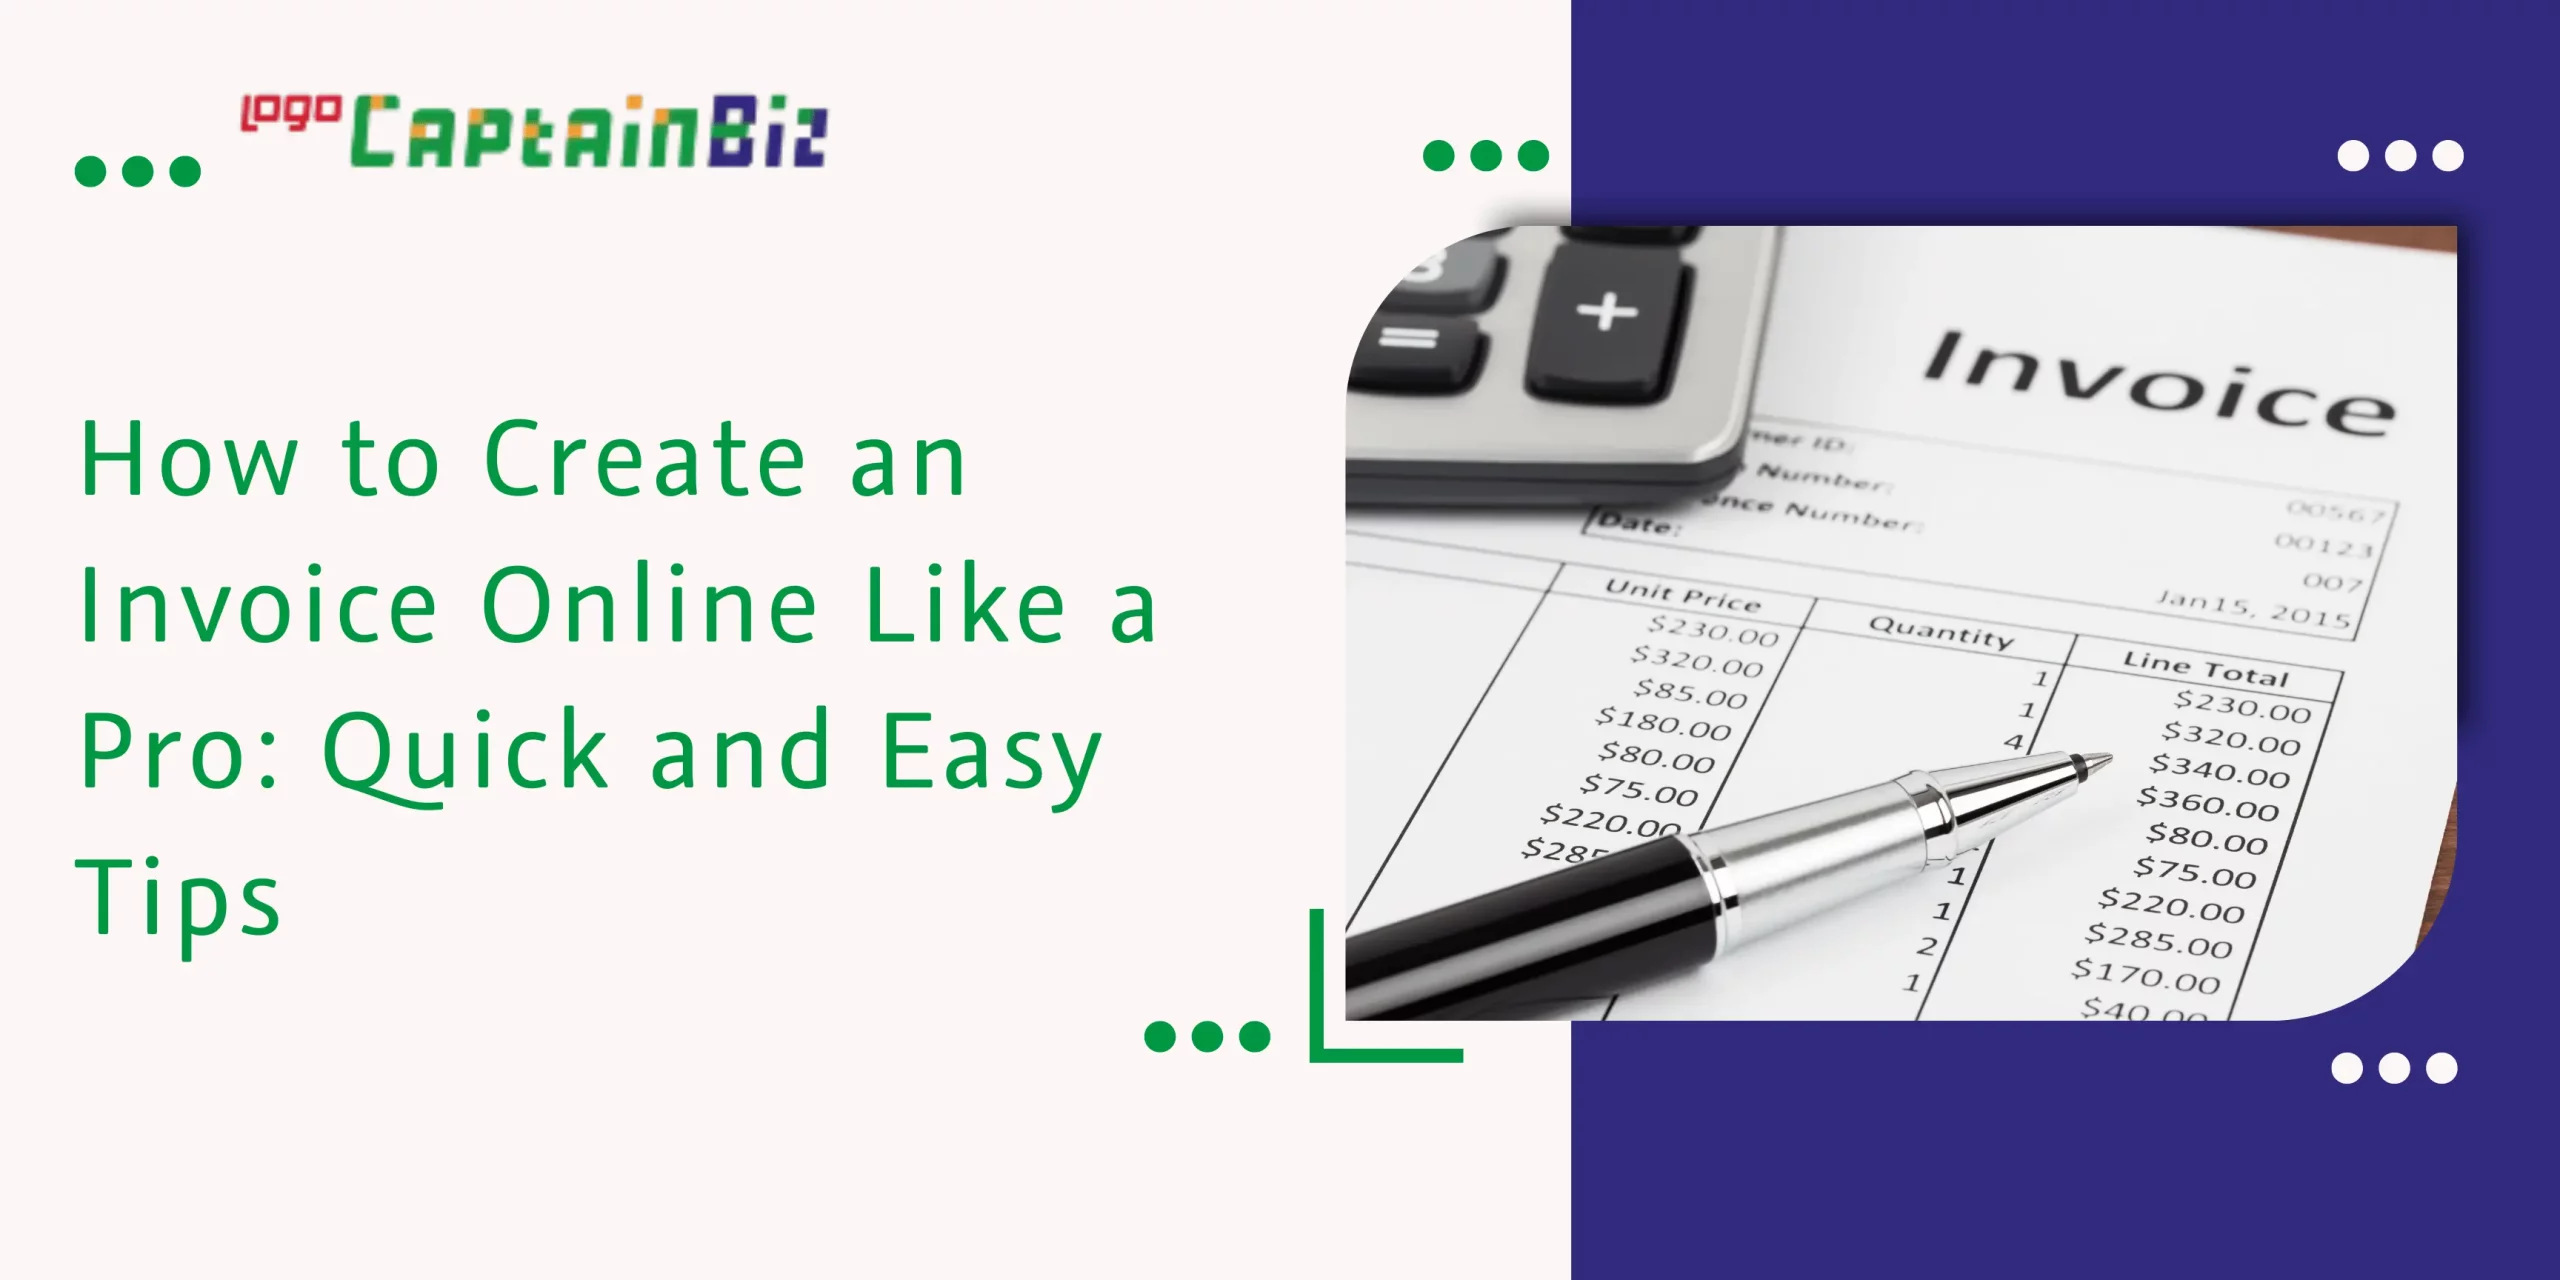 CaptainBiz: how to create an invoice online like a pro: quick and easy tips